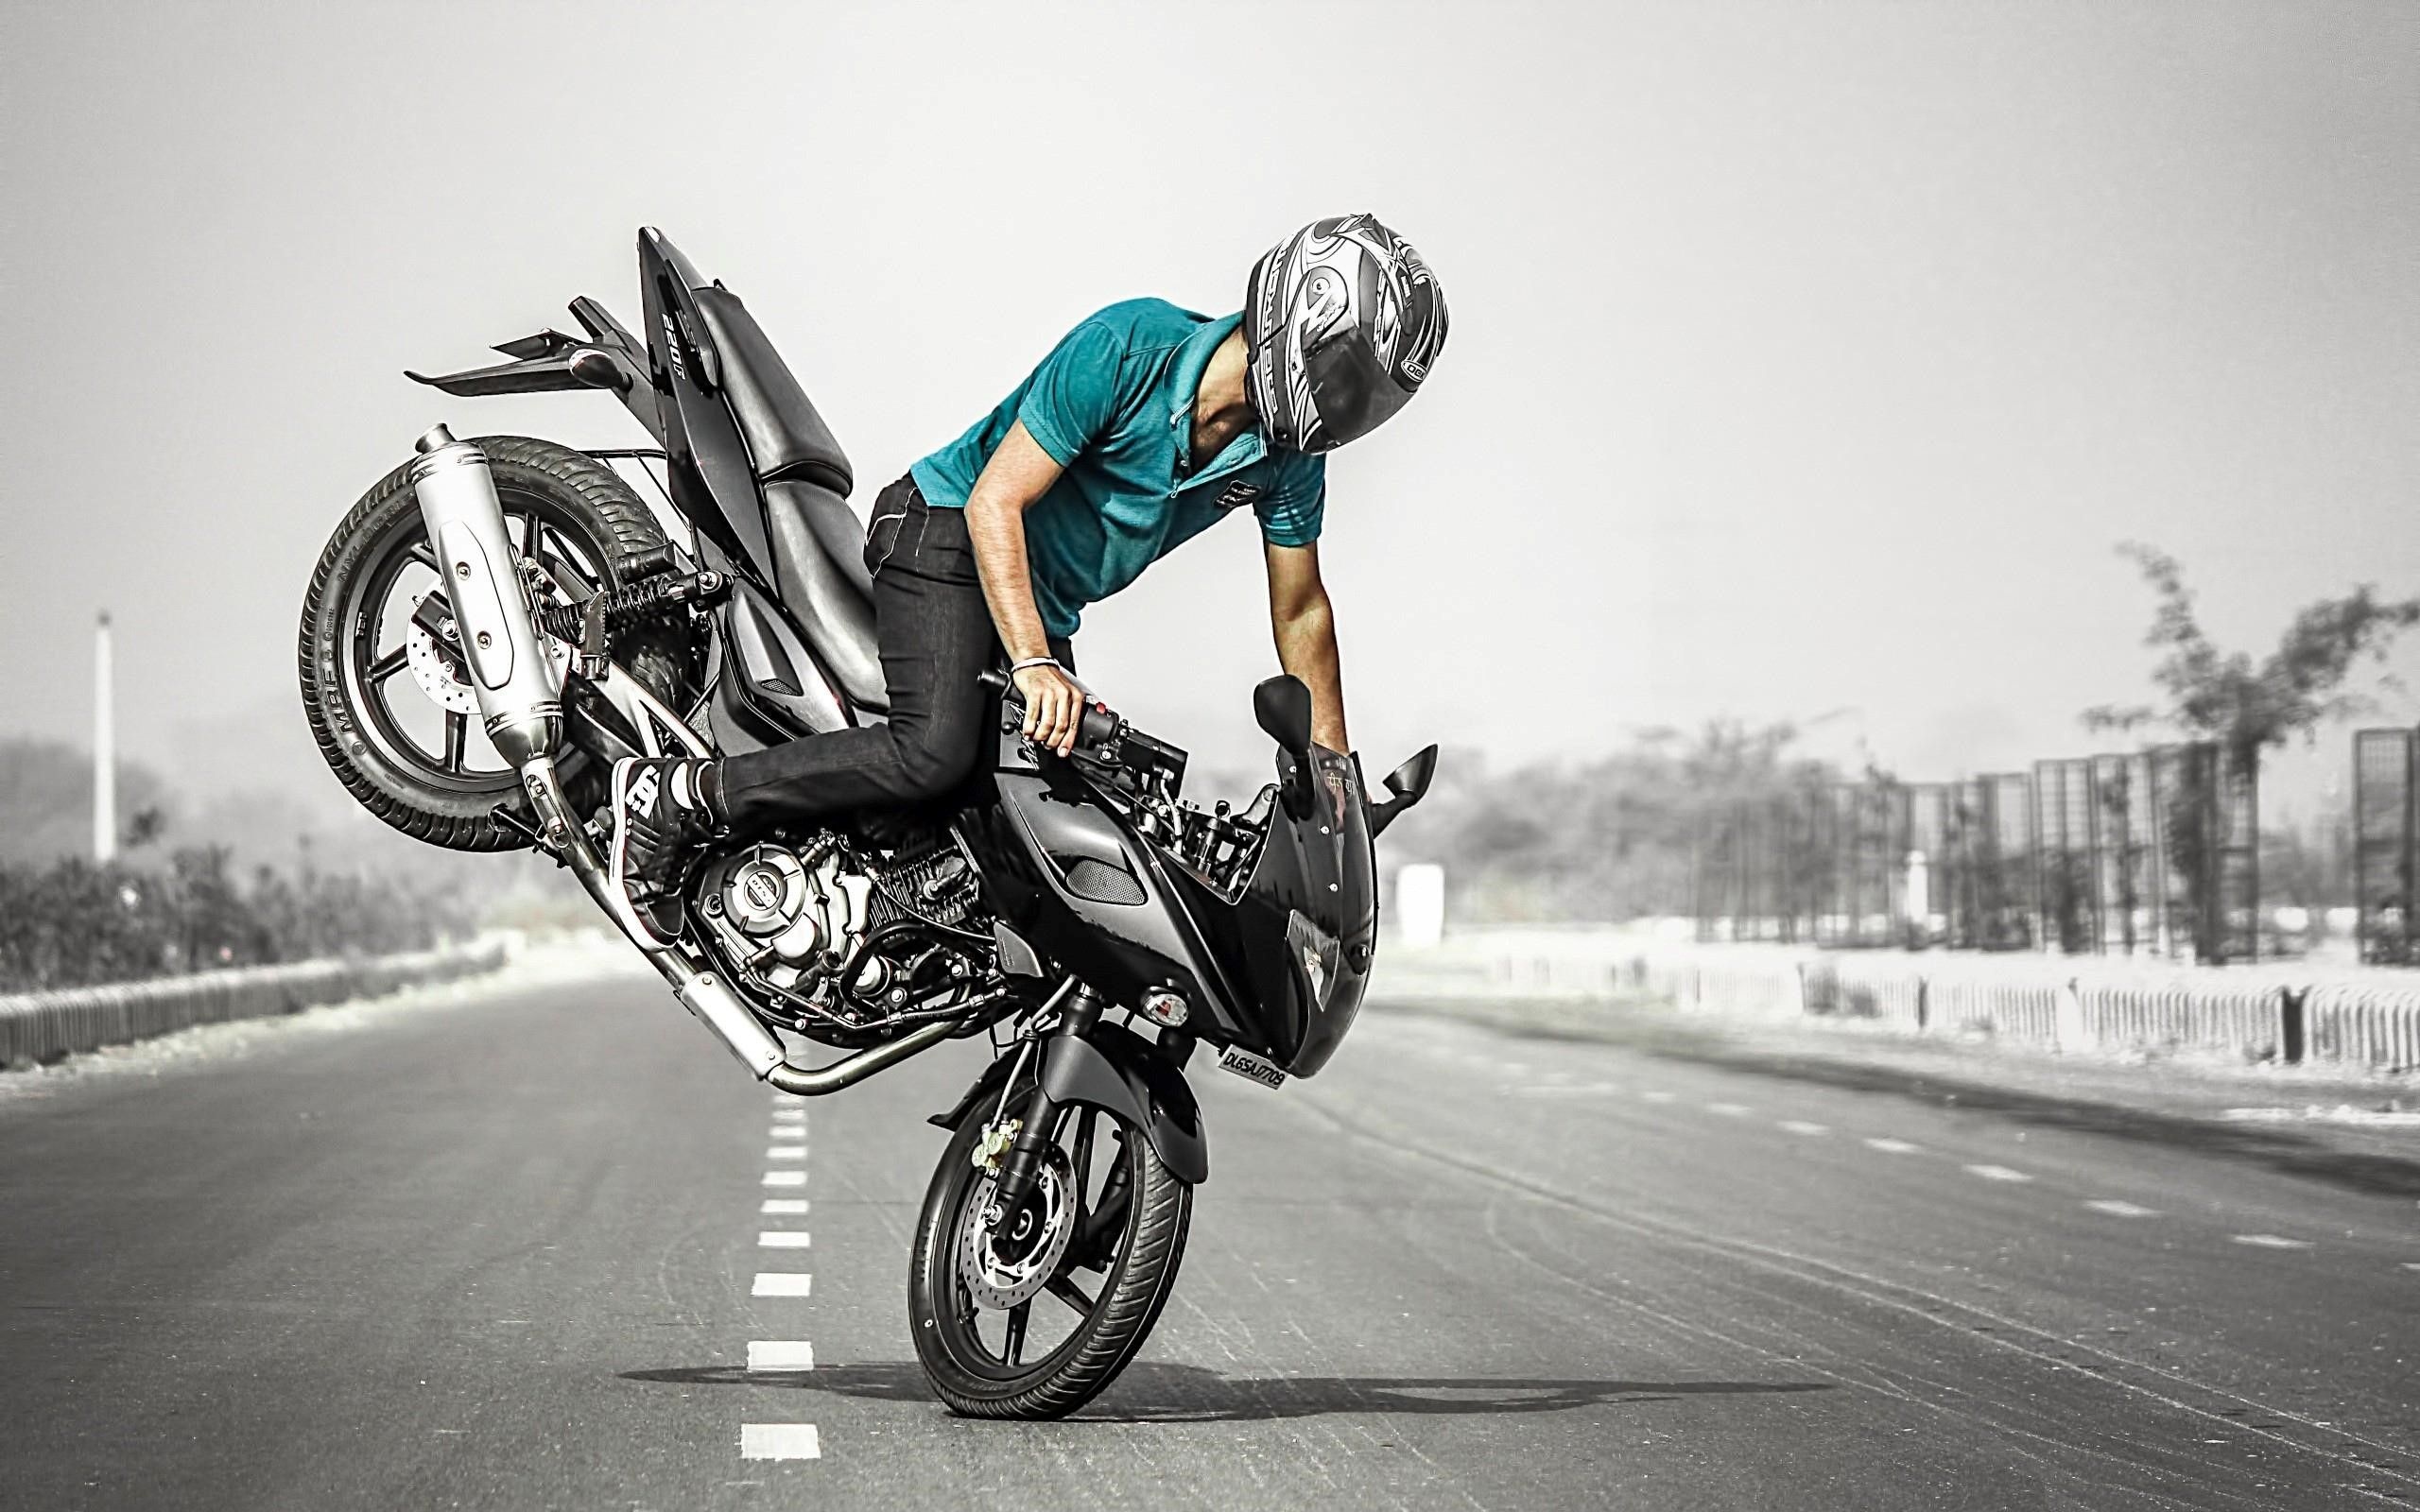 Stunt: Stoppie by a stuntman, Acrobatic maneuvering of the motorcycle. 2560x1600 HD Background.